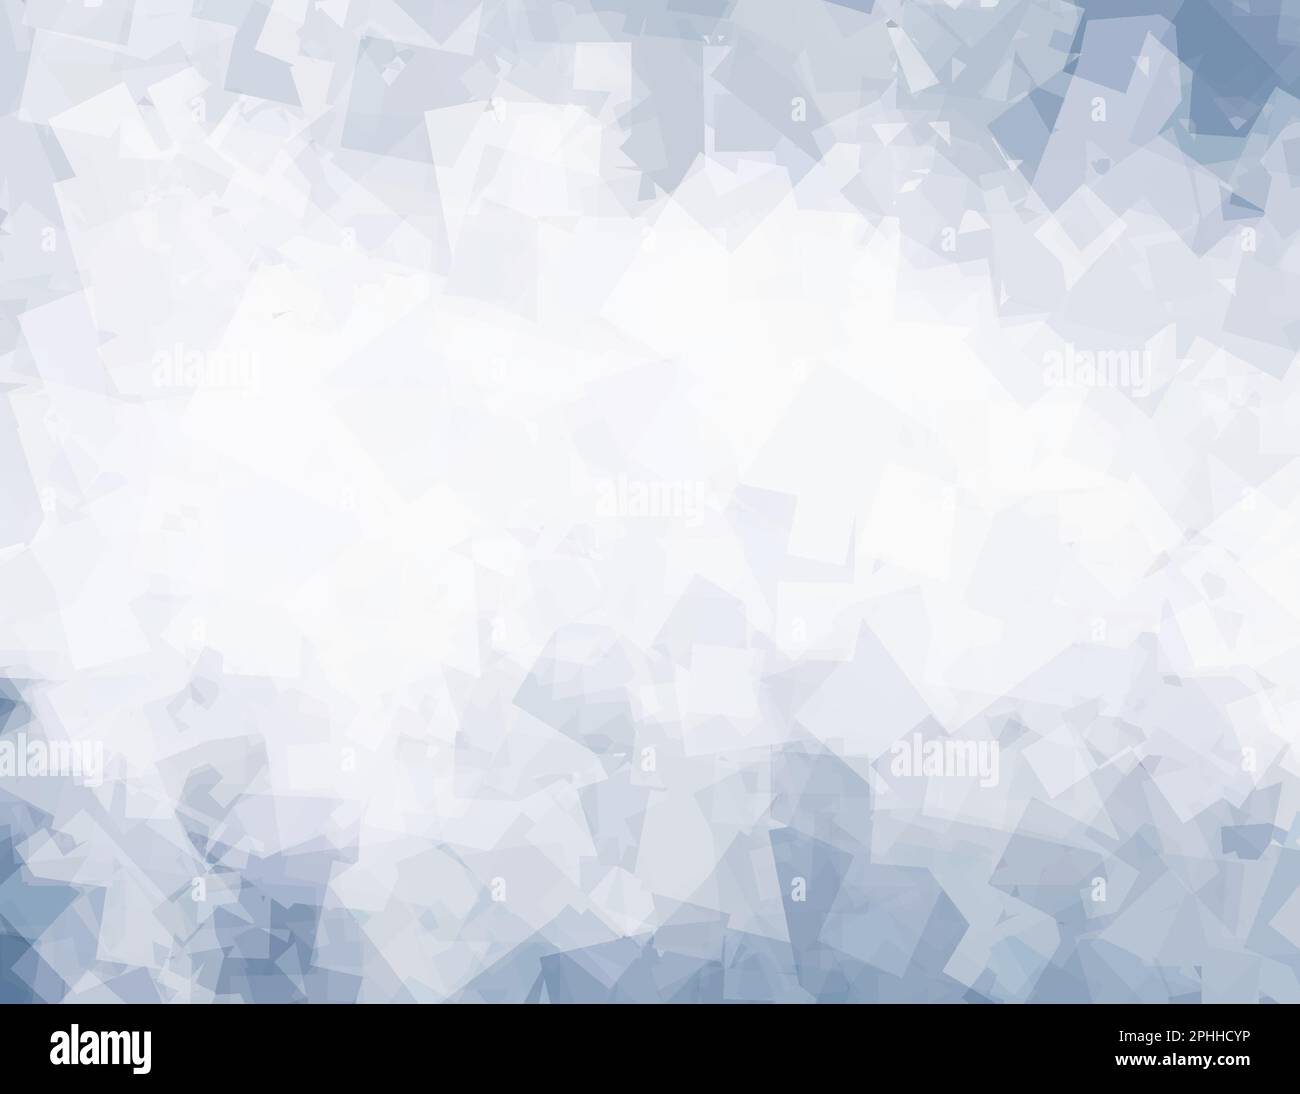 Abstract cool bluish gray geometric background with translucent chaotic texture. Artistic vector graphic pattern Stock Vector